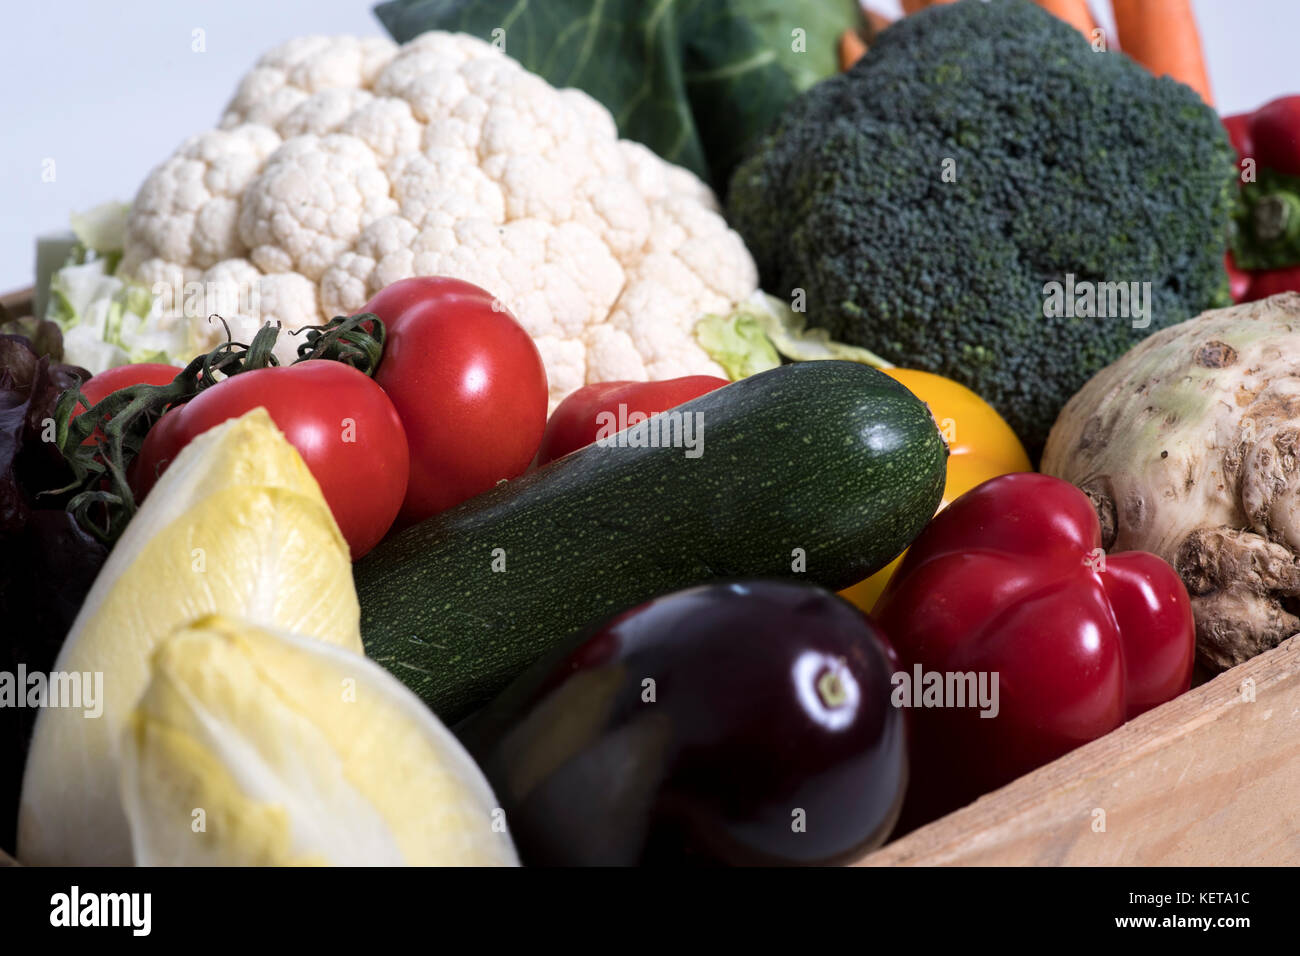 box with vegetables Stock Photo